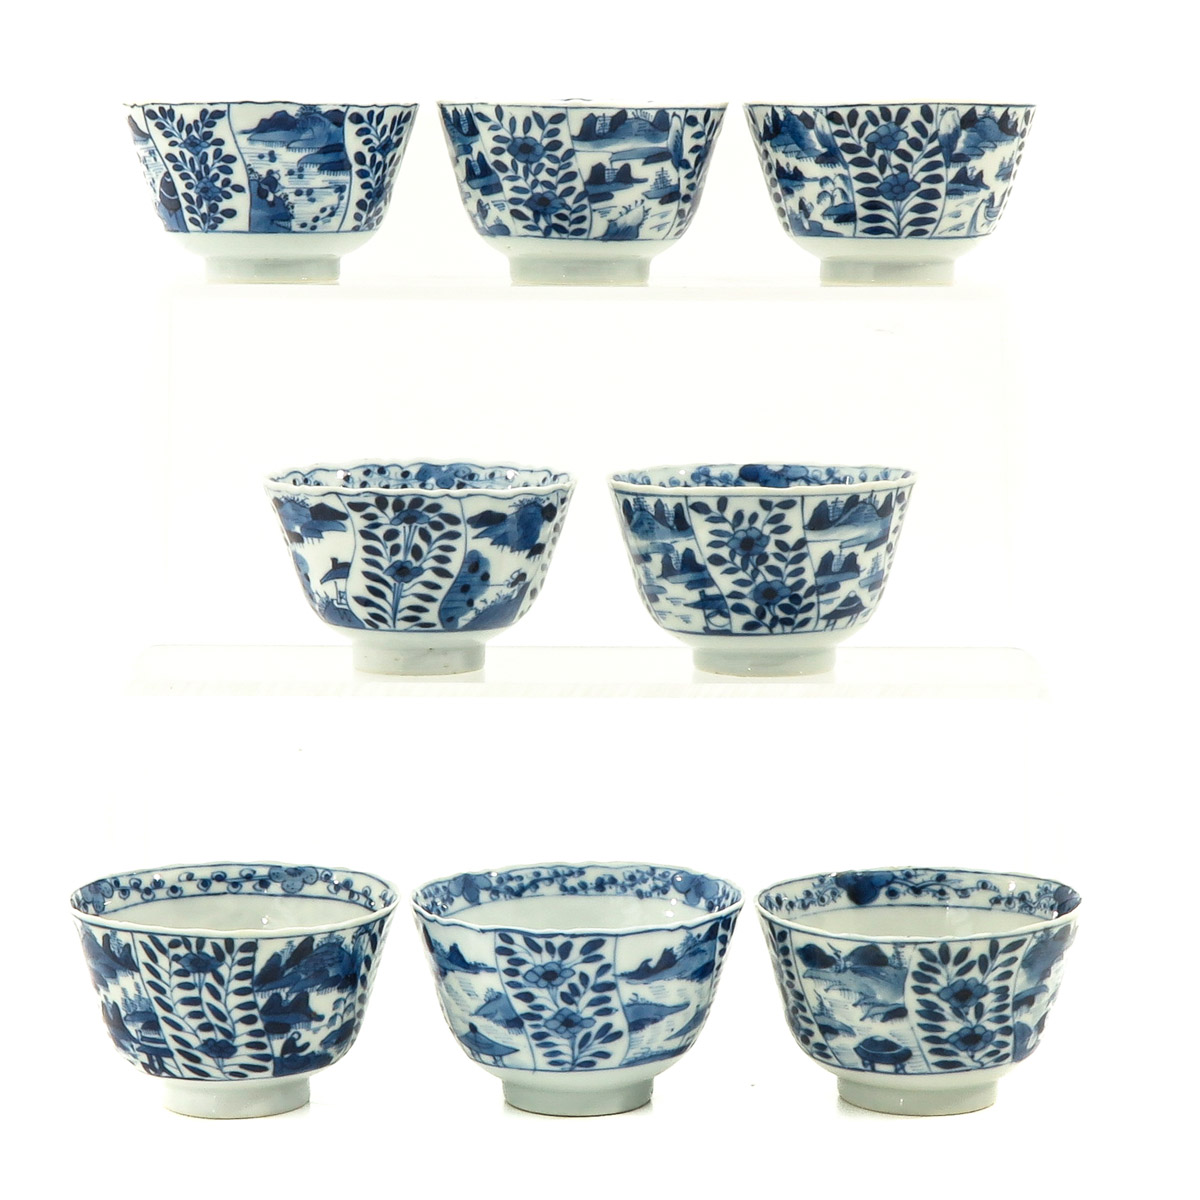 A Series of 8 Cups and Saucers - Image 4 of 10